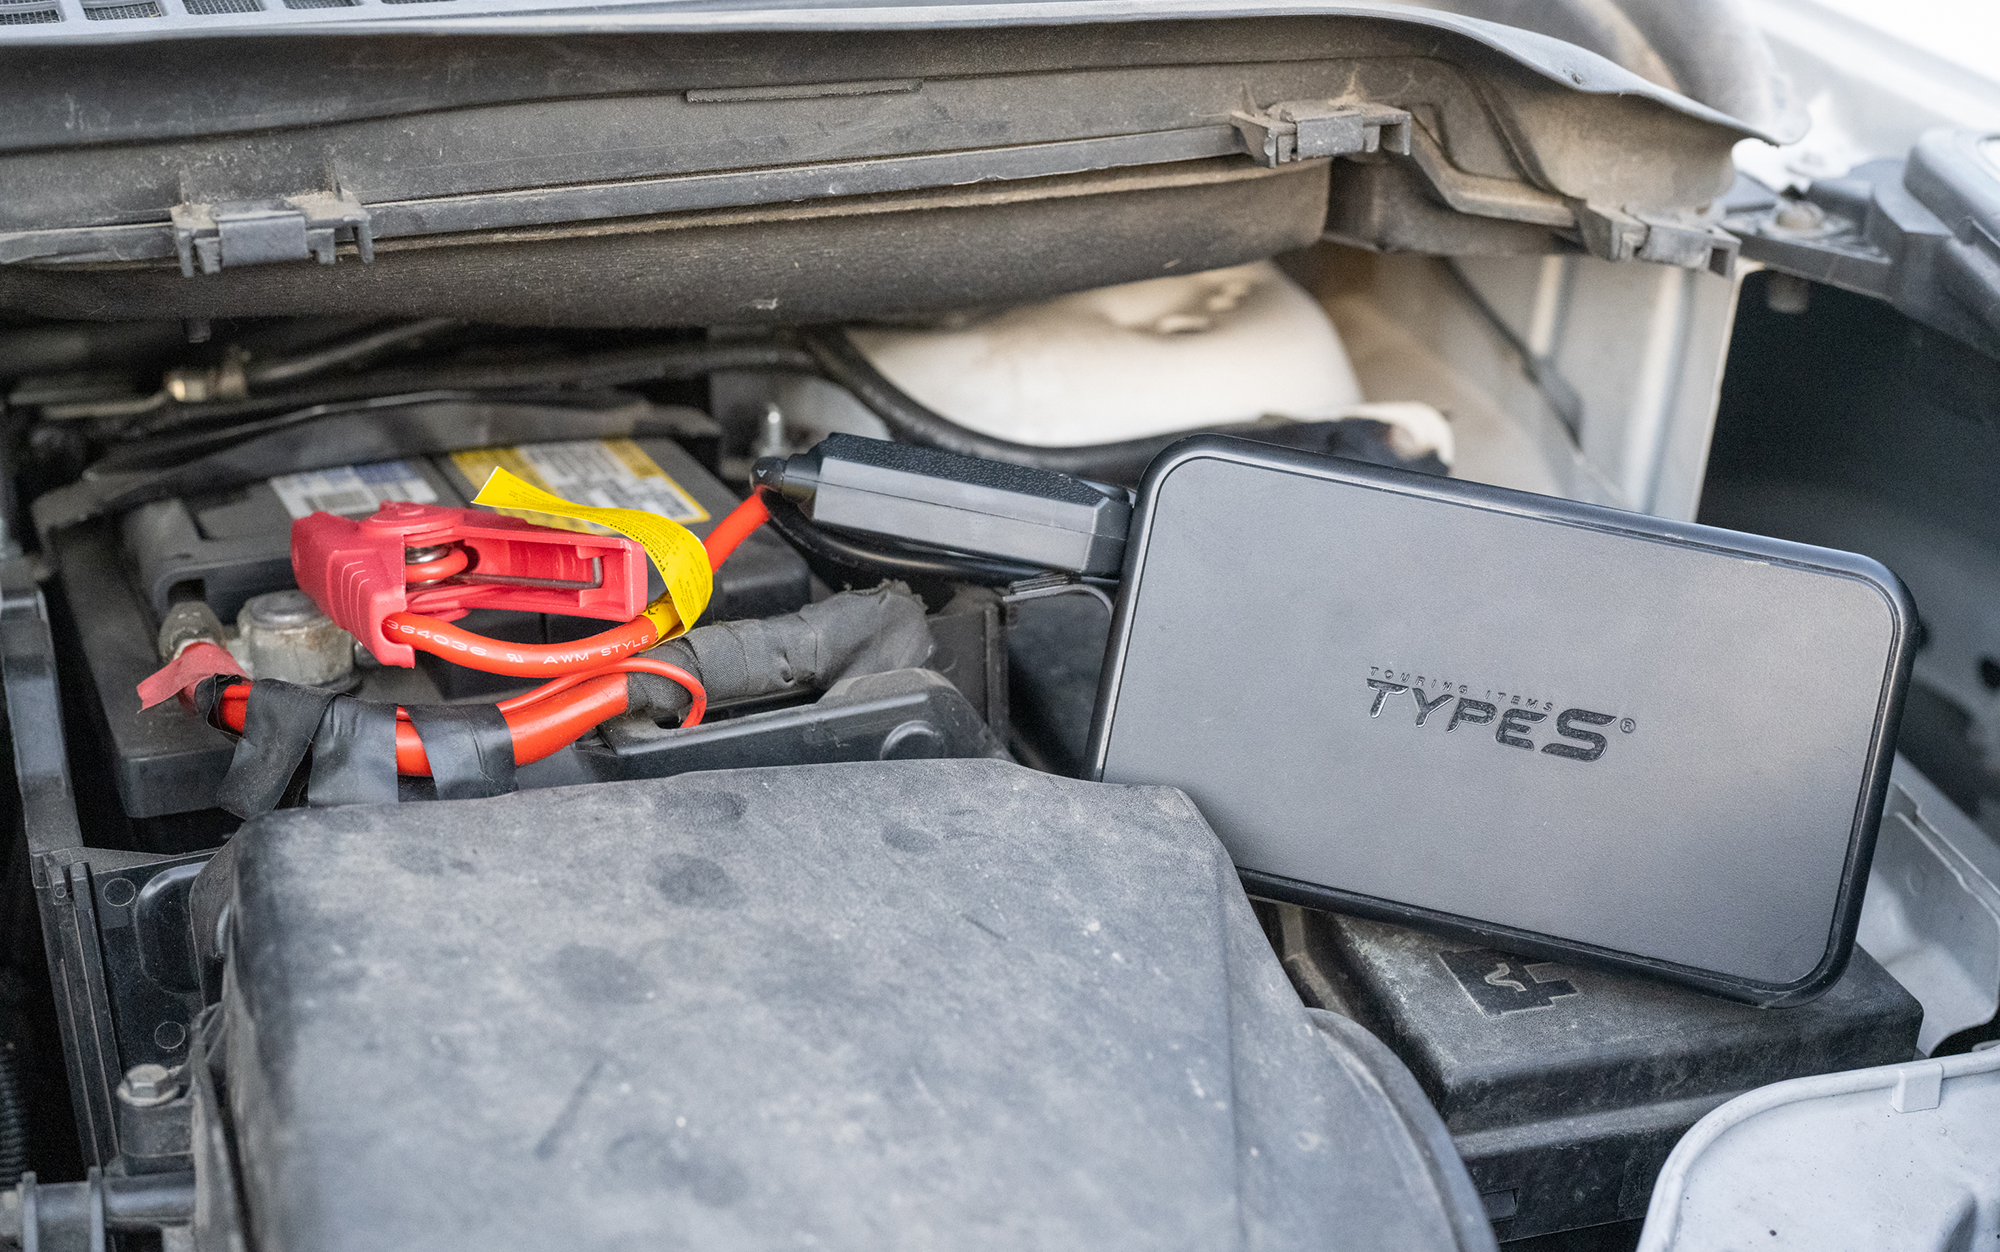 Author tests the Type S 12V 6.0L Battery Jump Starter.